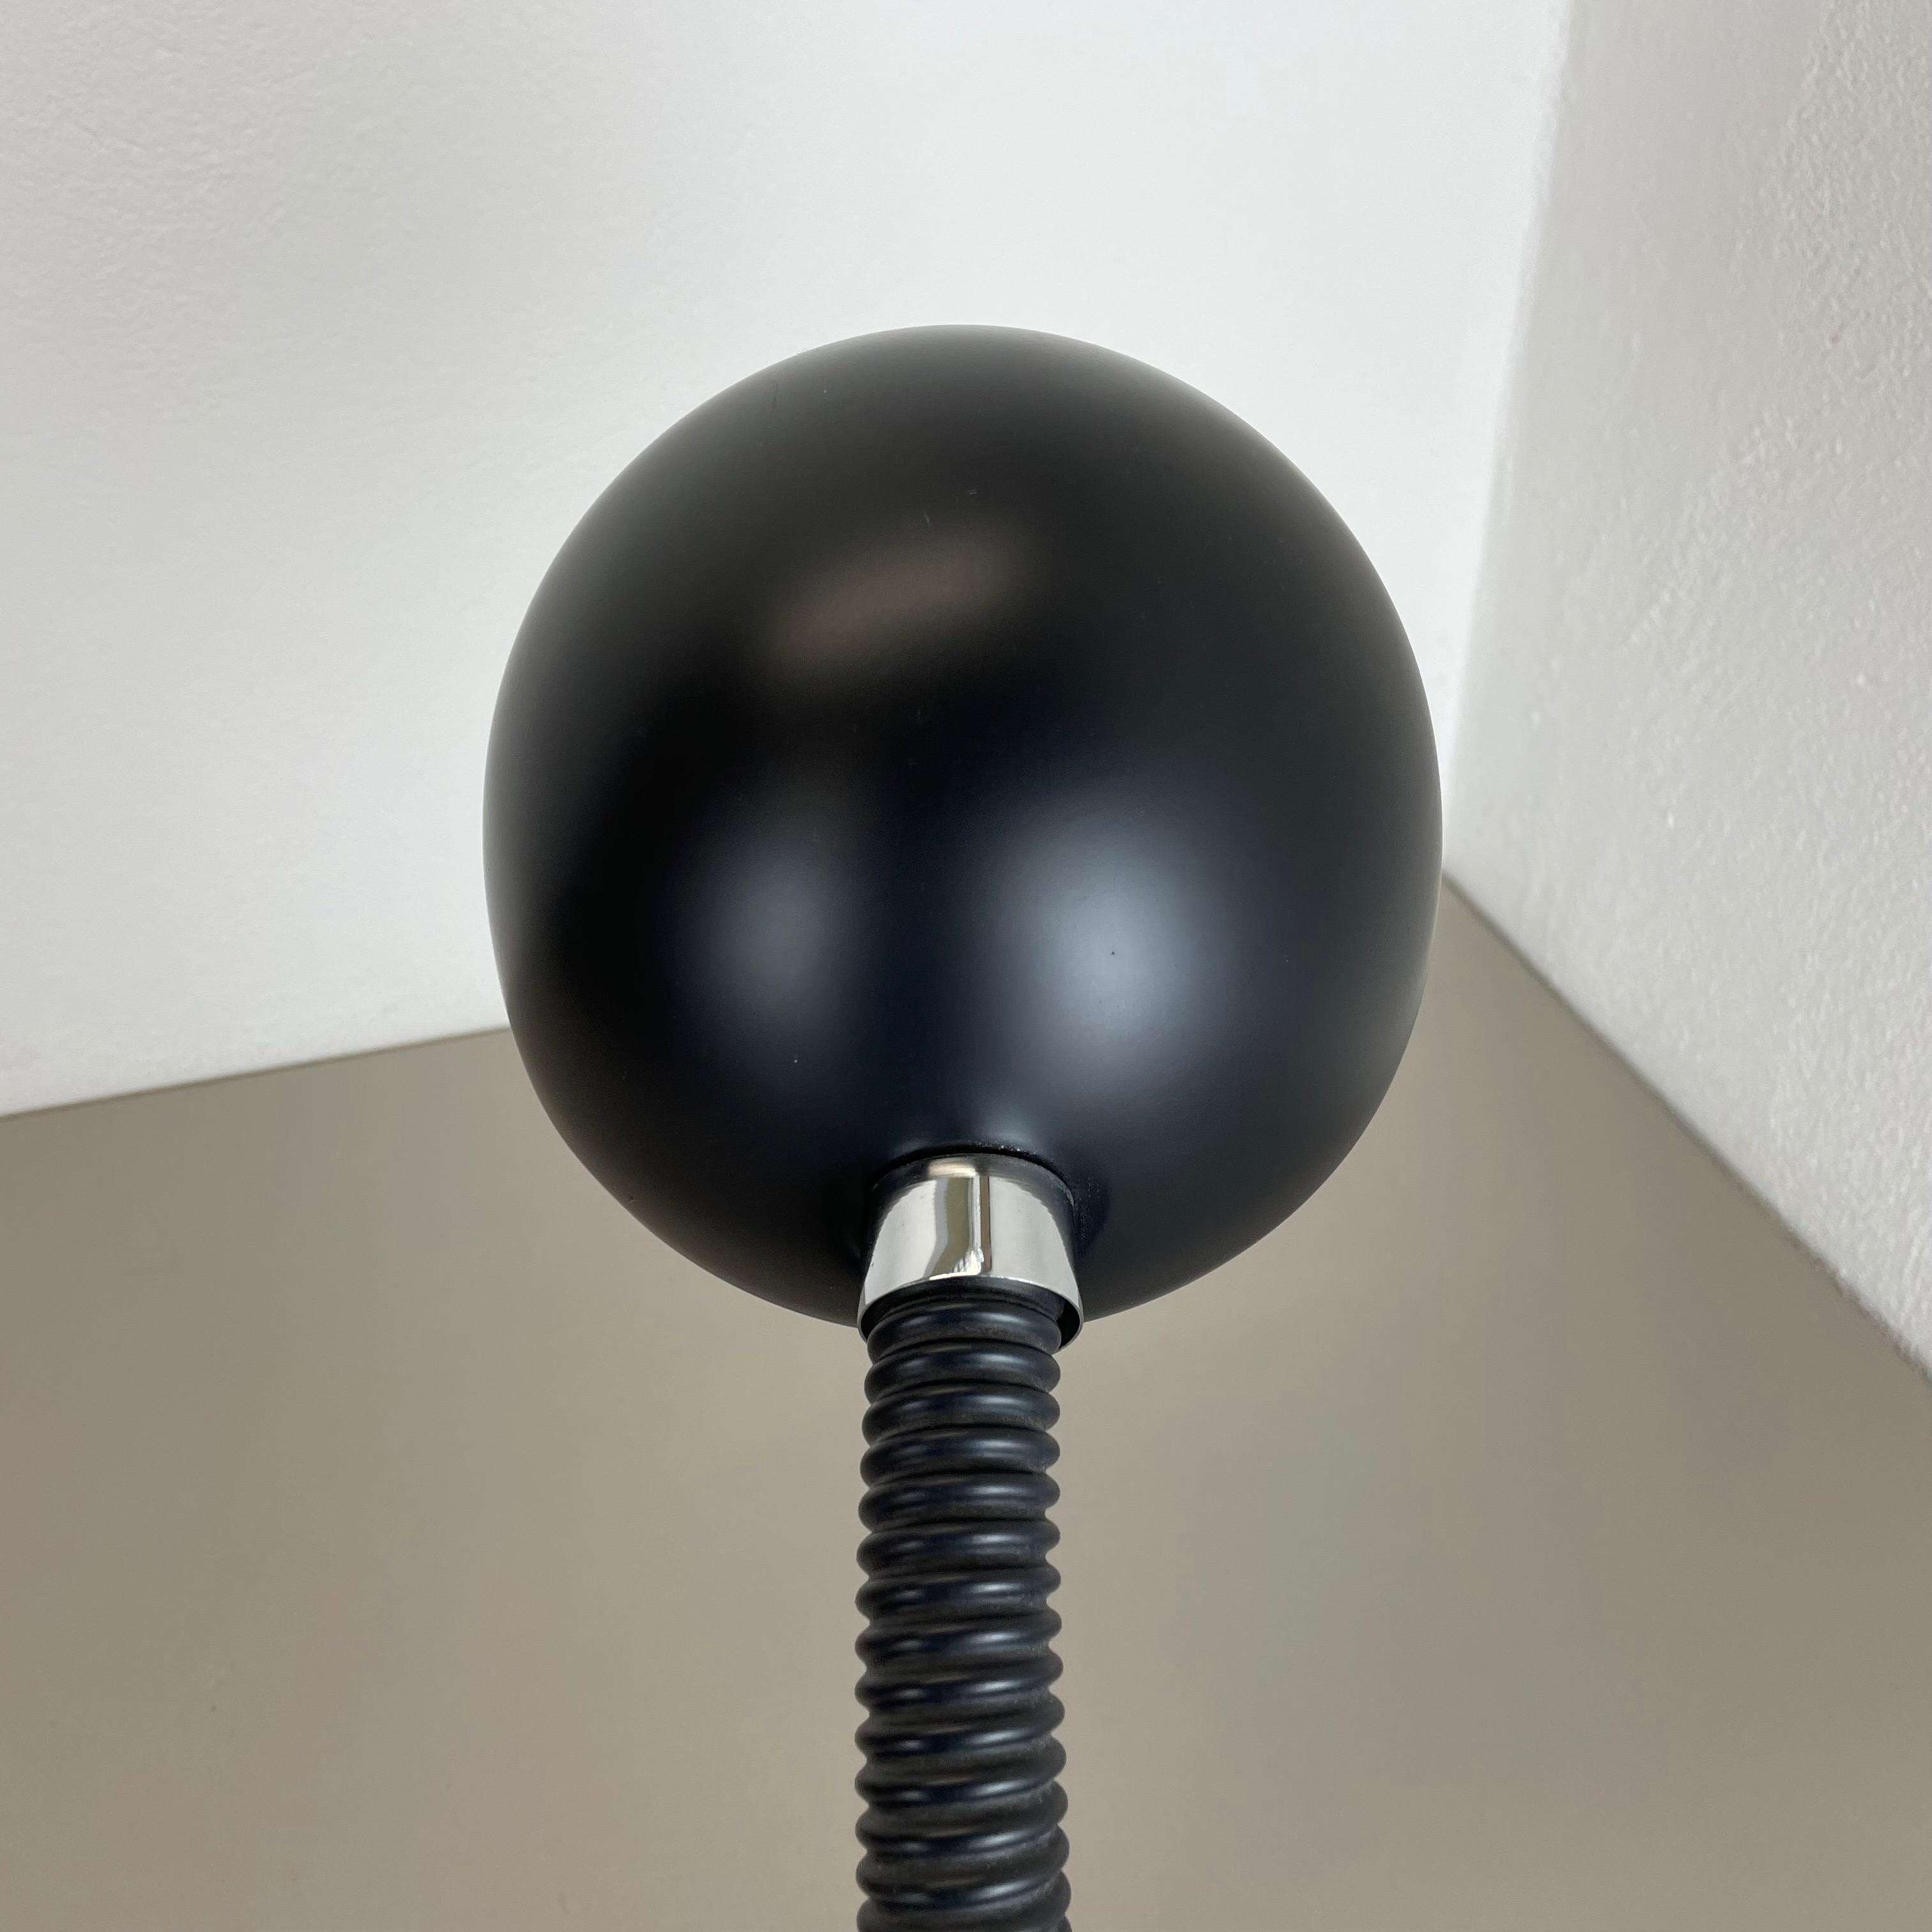 Modernist SPACE AGE Metal Table Light by Hillebrand Leuchten, Germany, 1970s For Sale 8